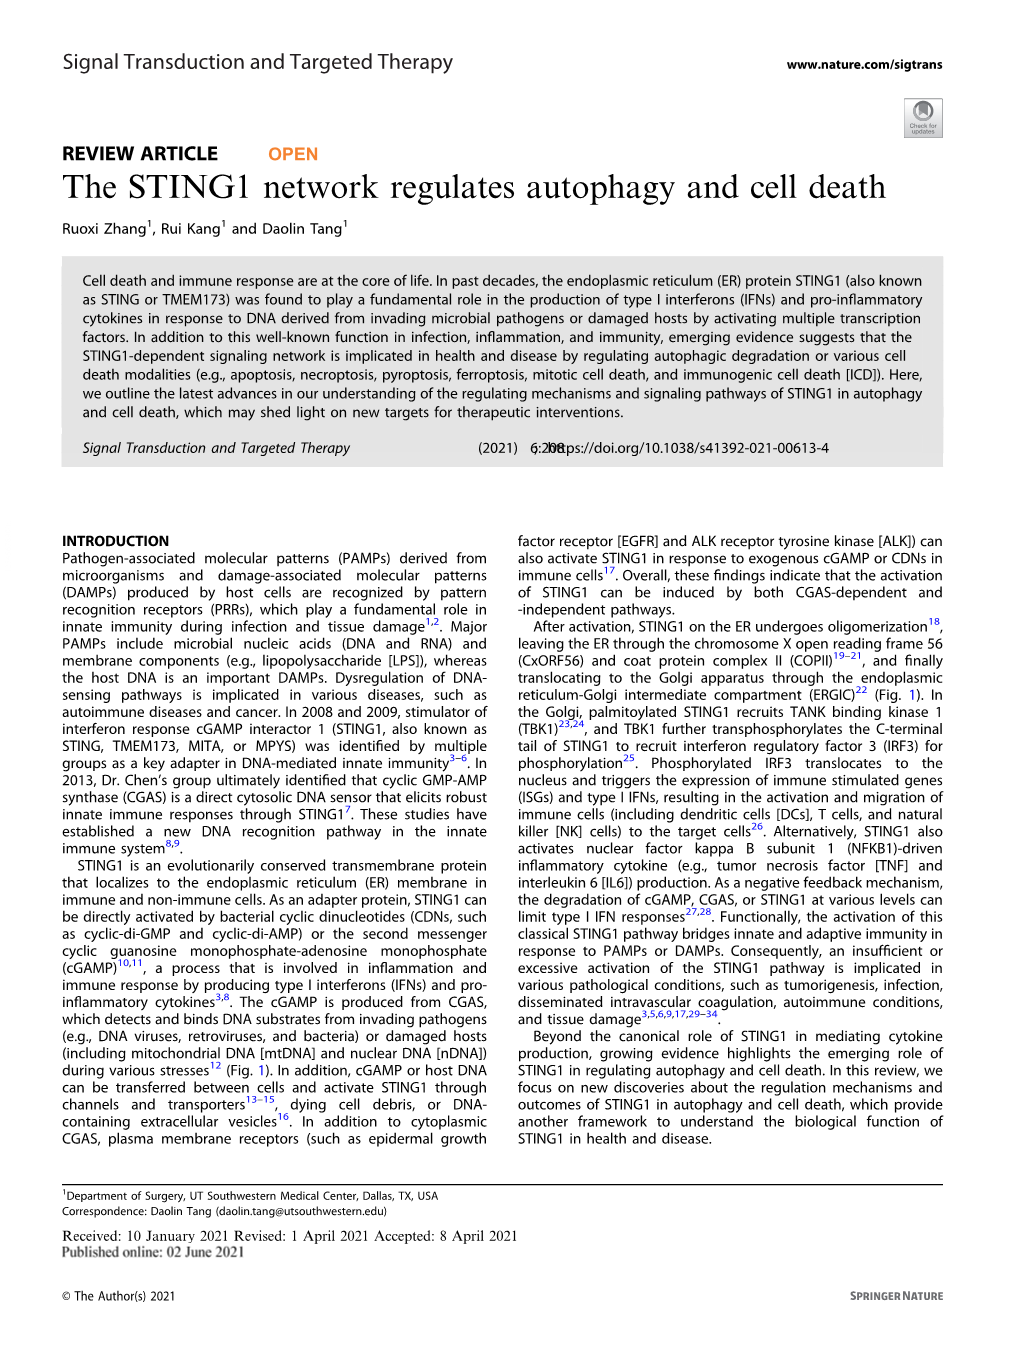 The STING1 Network Regulates Autophagy and Cell Death